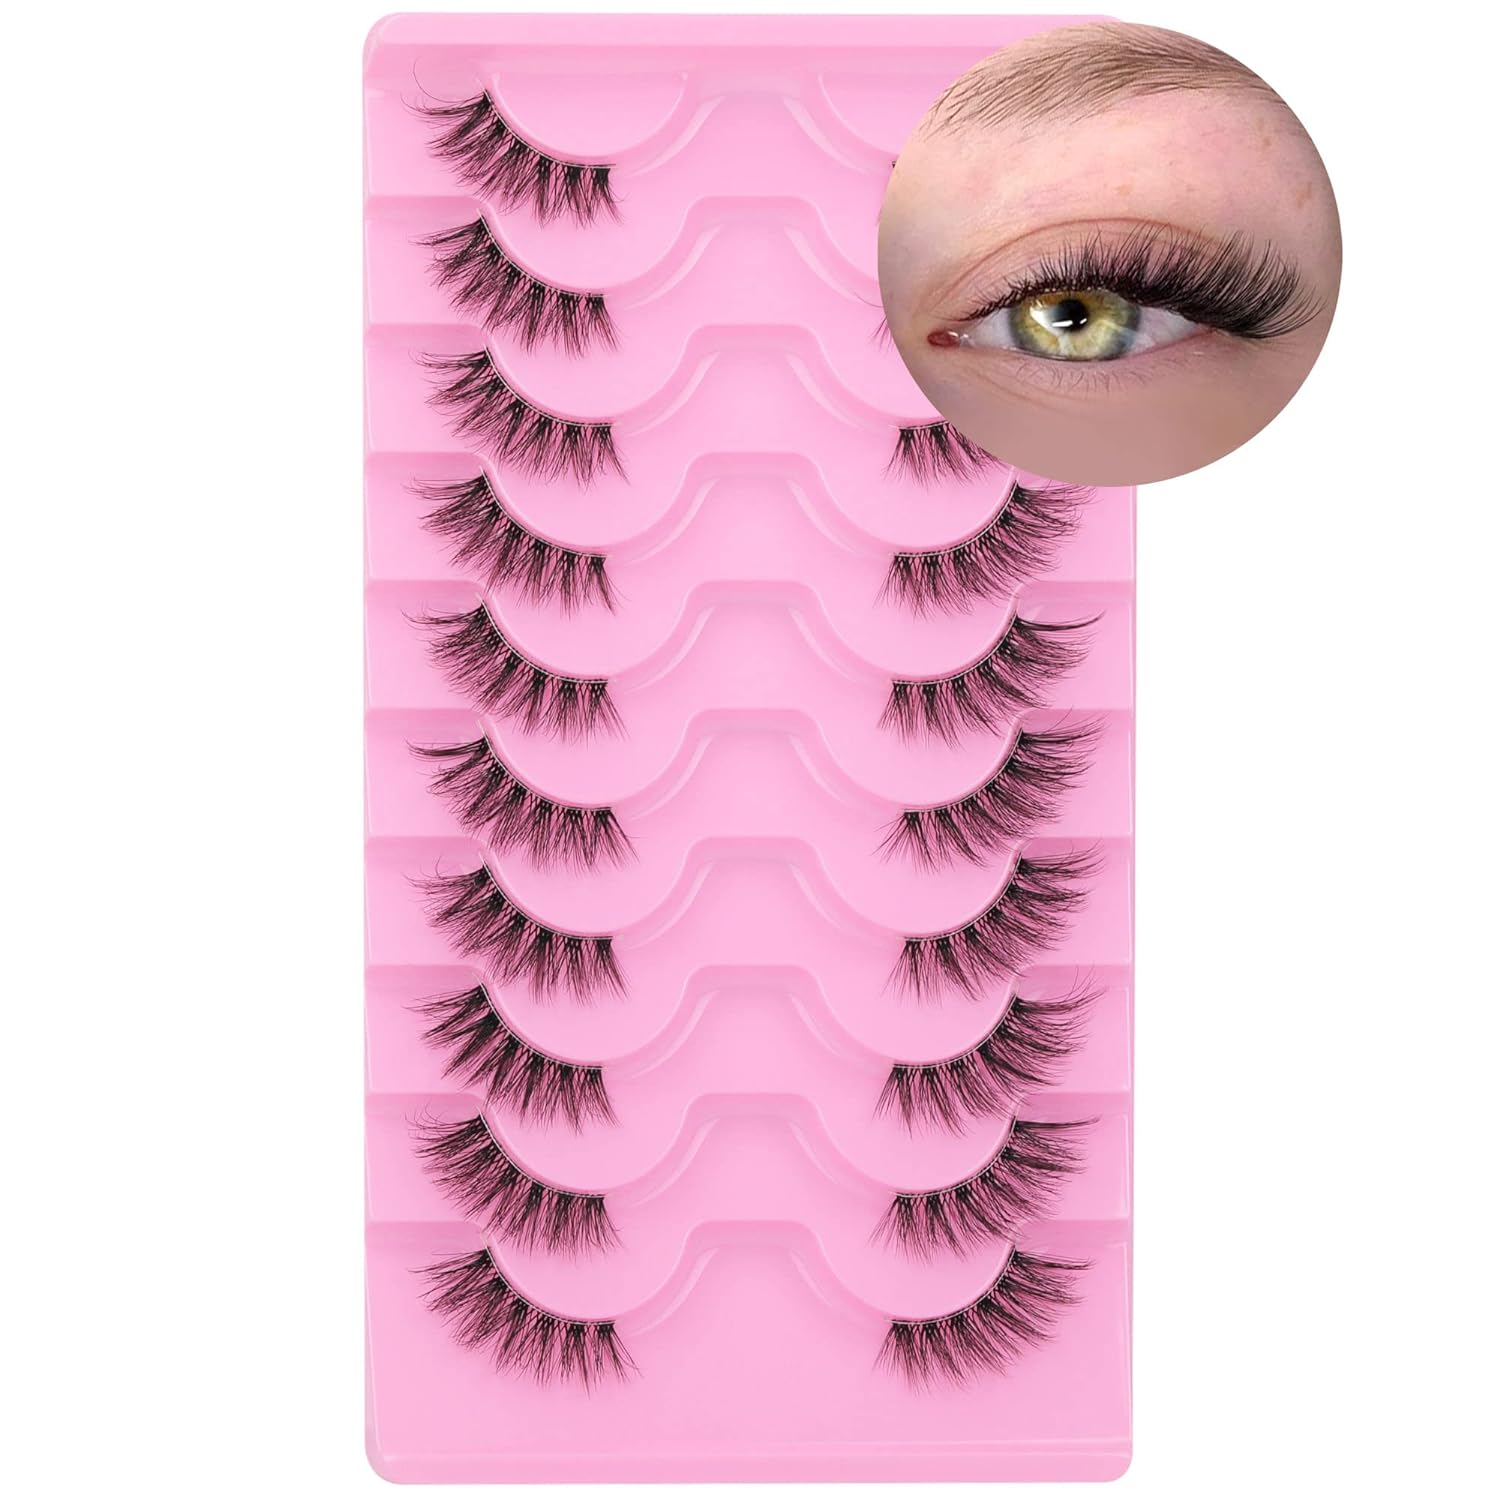 Half Lashes Natural Look Wispy Curly Cat Eye Cluster Lashes Fluffy 14mm Clear Band Accent Short False Eyelashes that Look Like Extensions 10 Pairs by FANXITON